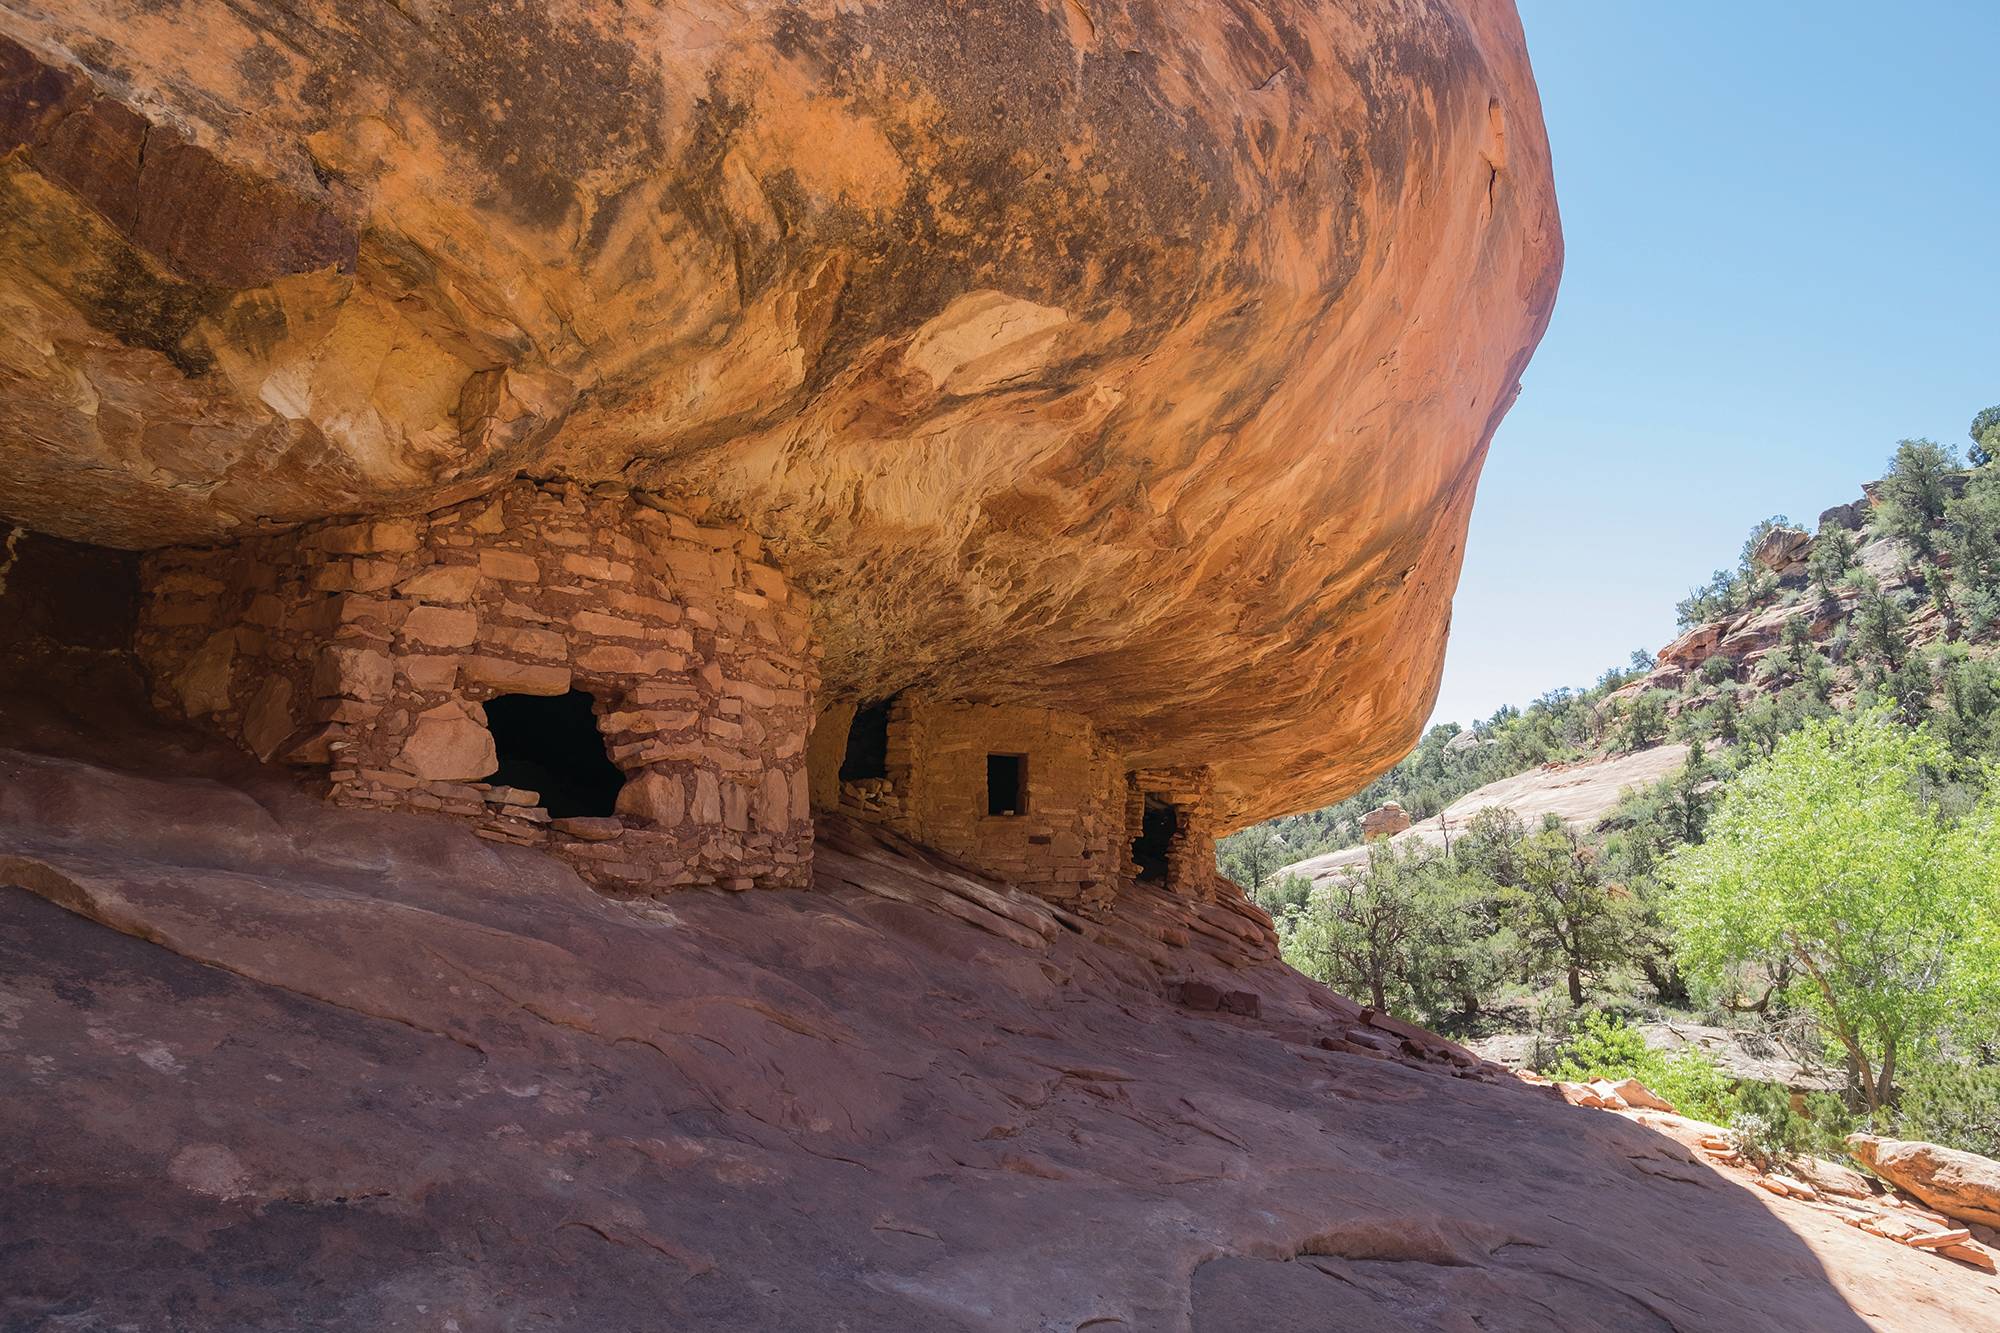 Everything you need to know about visiting Bears Ears National Monument